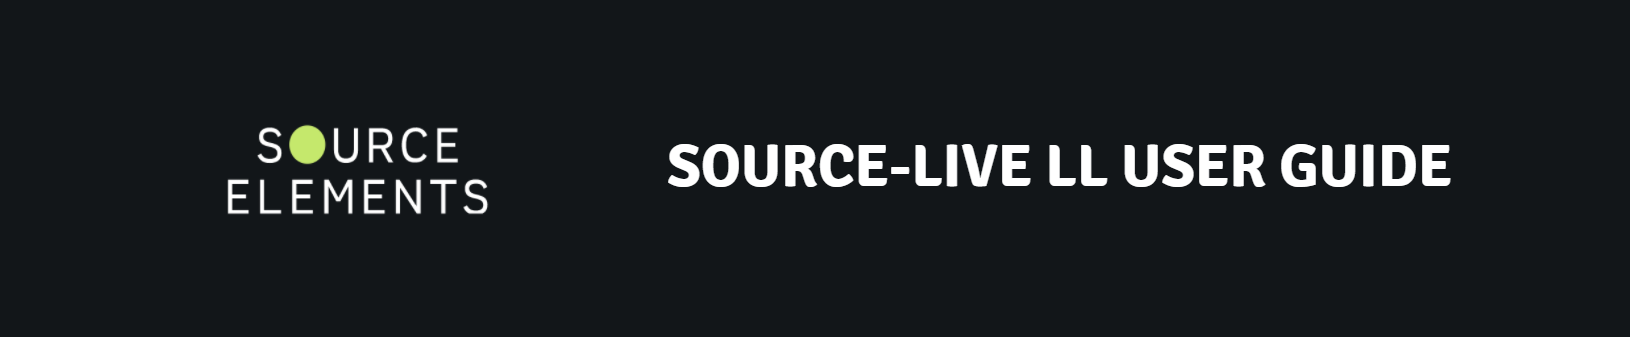 Source-Live LL User Guide